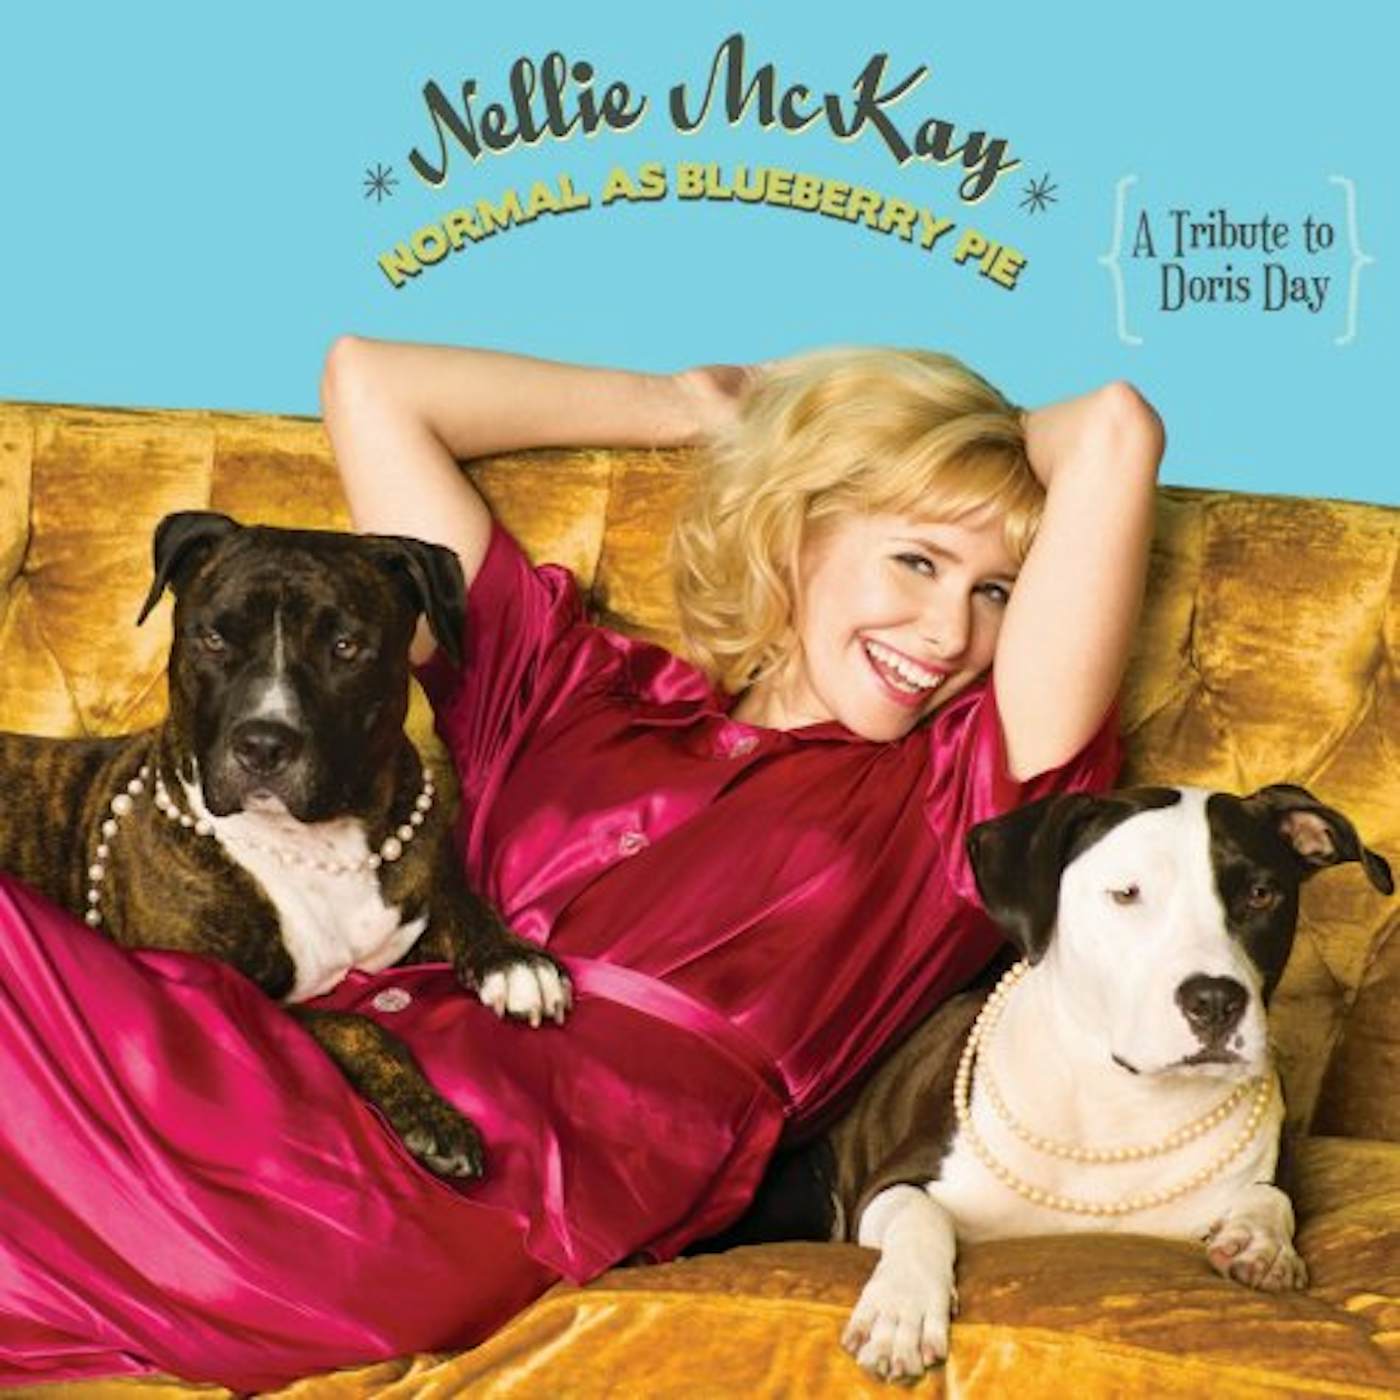 Nellie McKay NORMAL AS BLUEBERRY PIE: A TRIBUTE TO DORIS DAY Vinyl Record